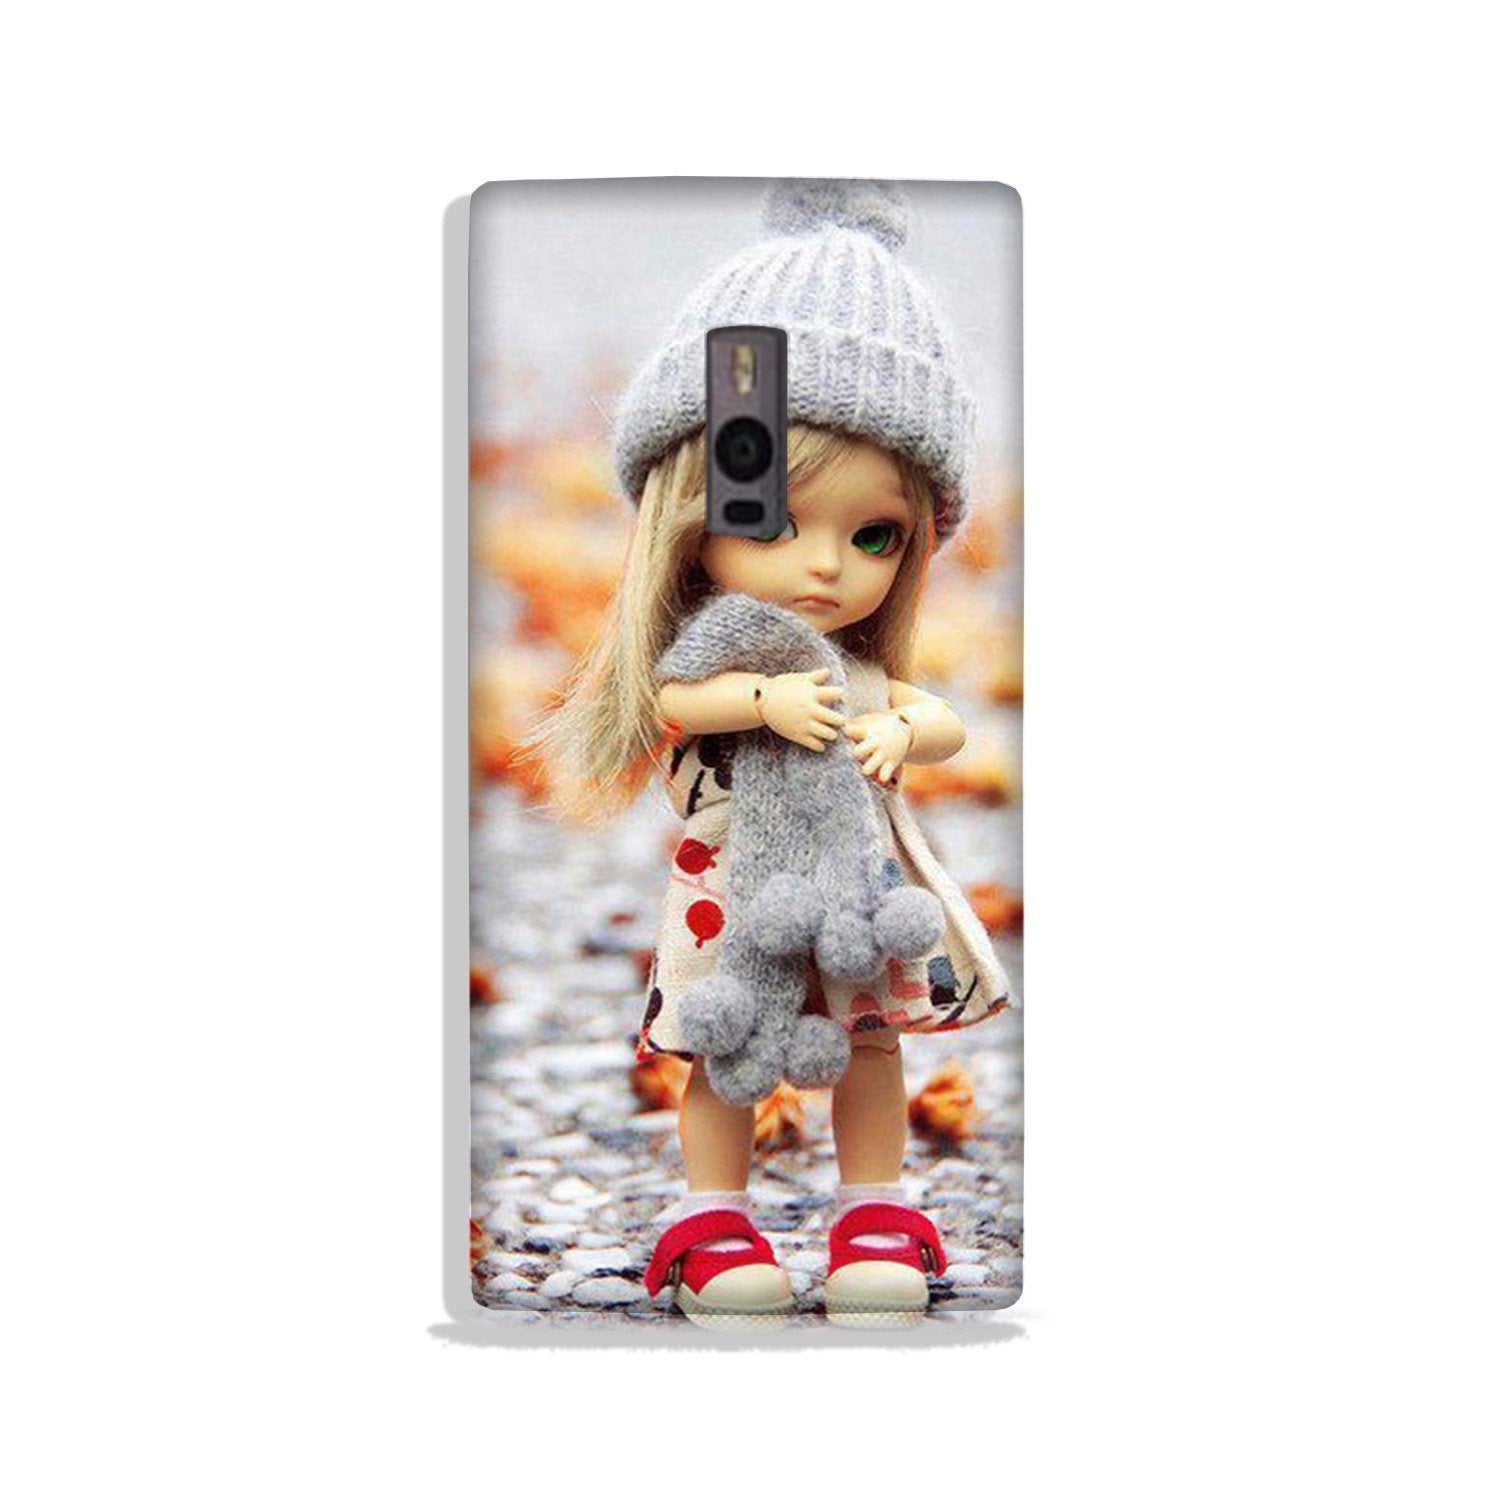 Cute Doll Case for OnePlus 2